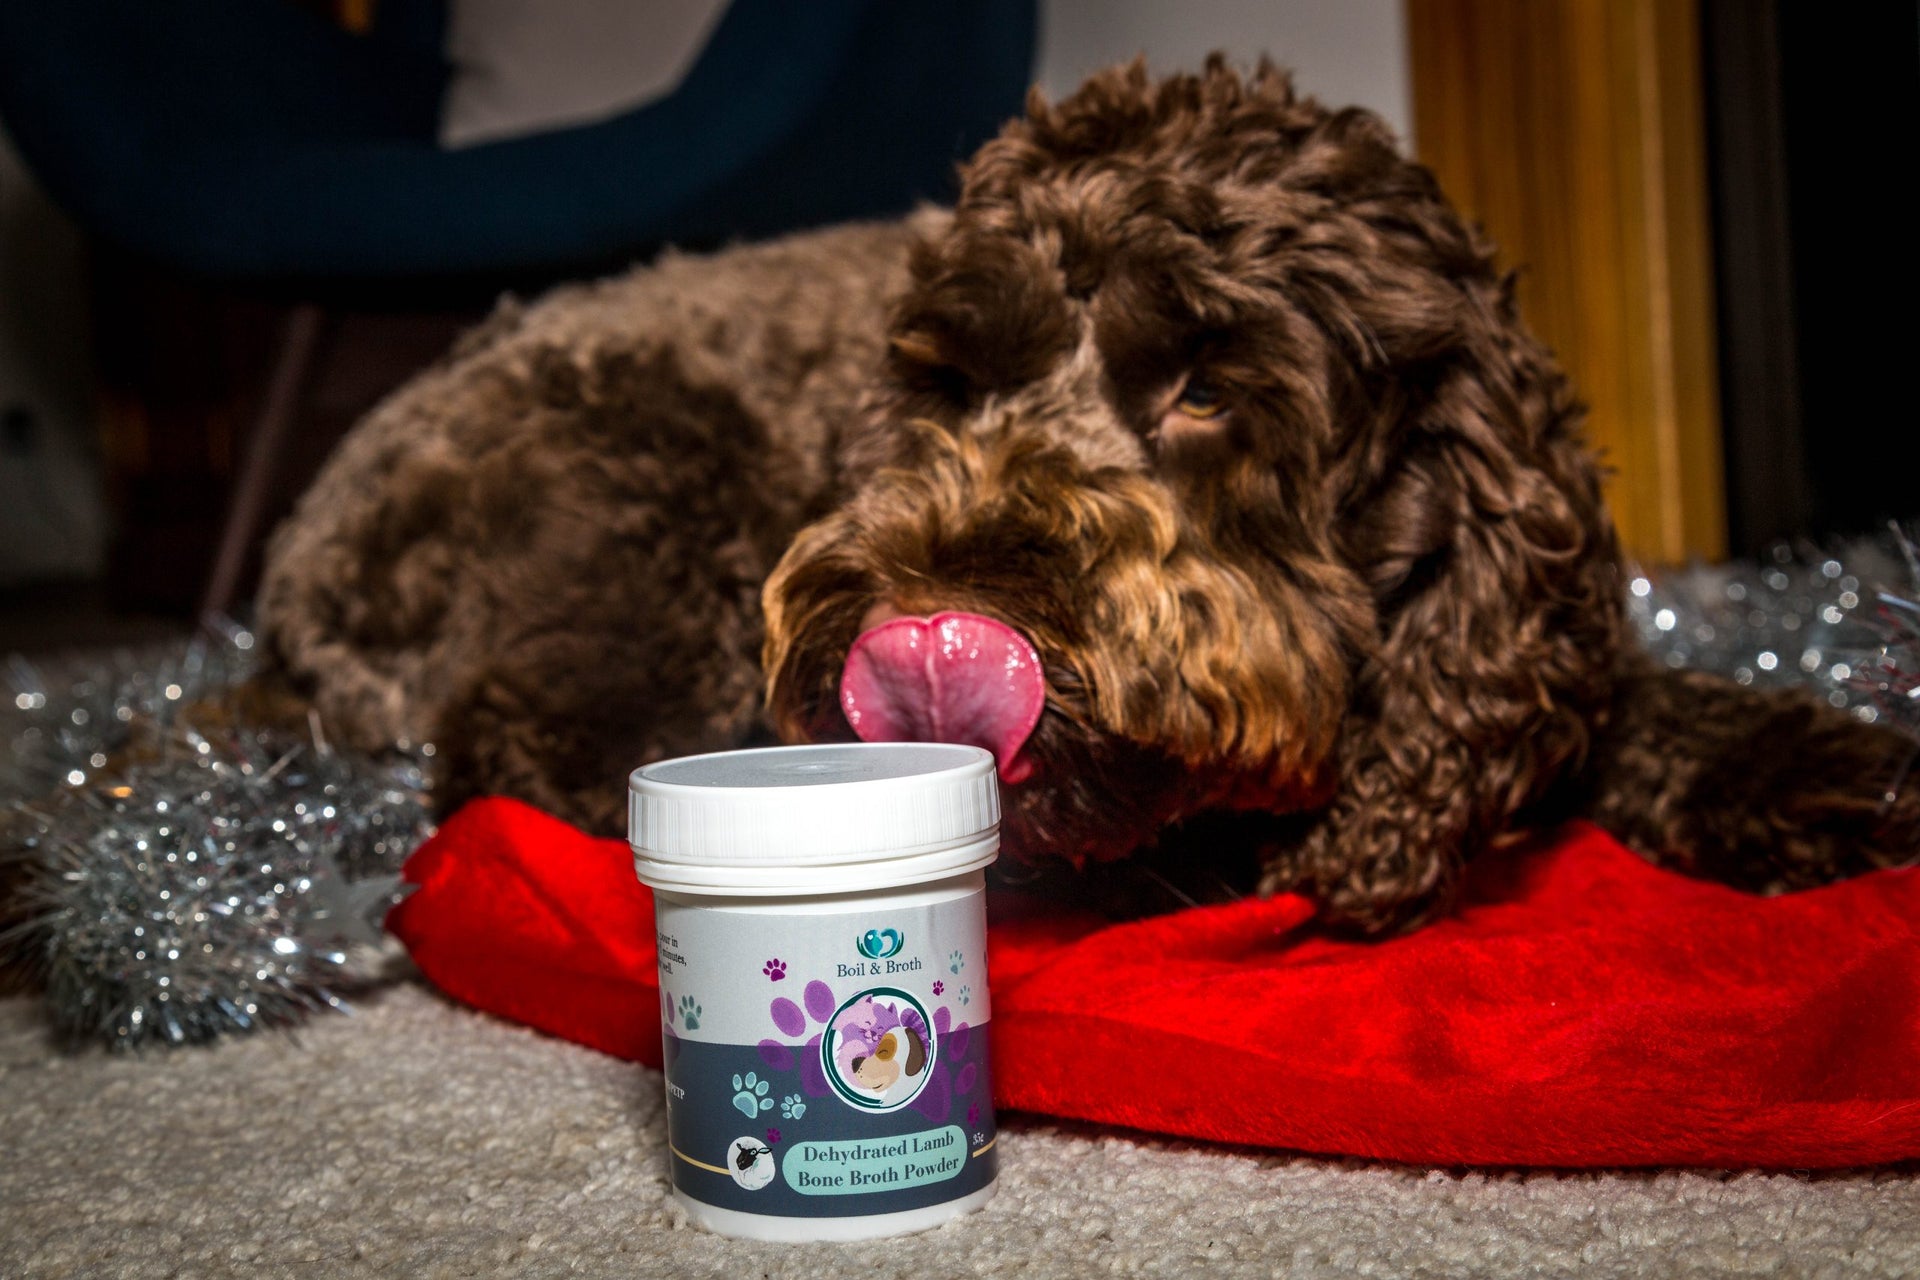 Can probiotics stop my dog’s itchy skin?